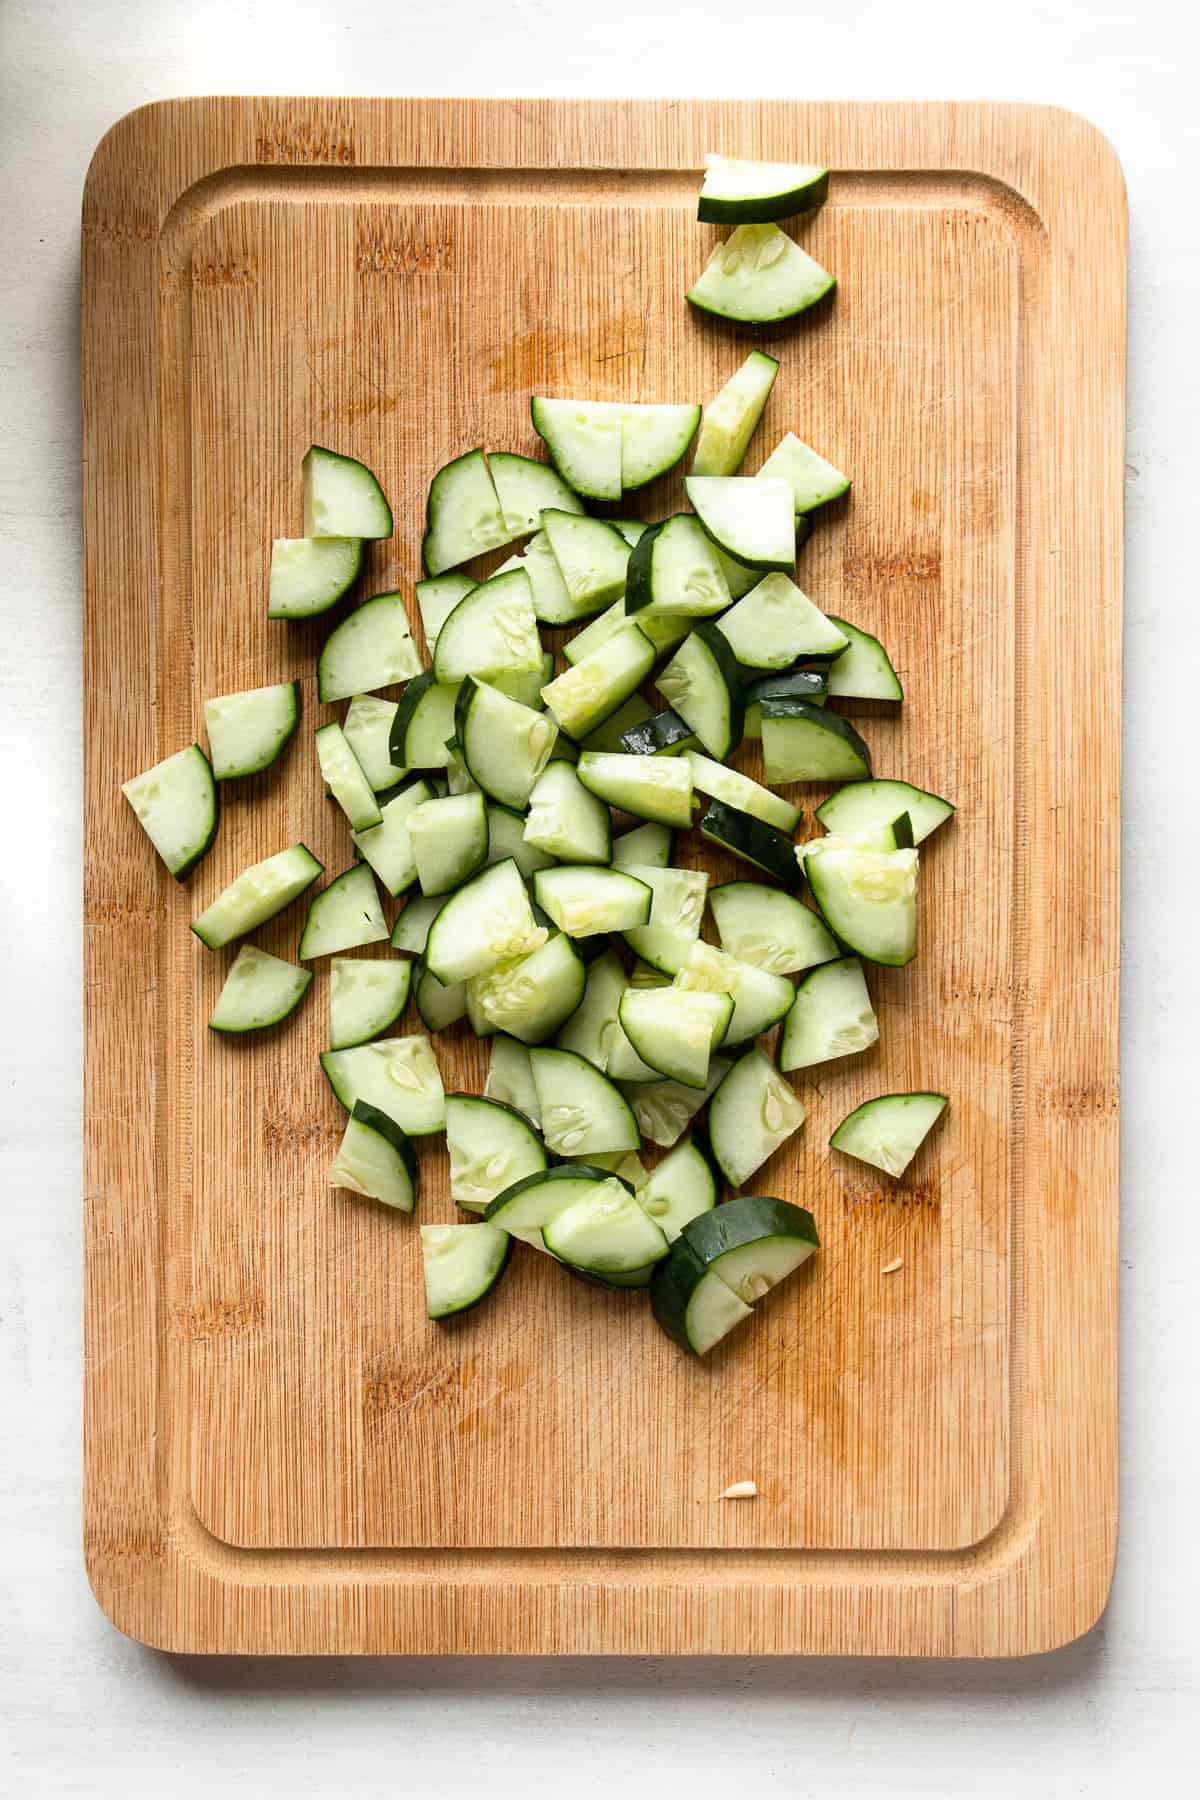 Sliced English cucumber on a wooden board.